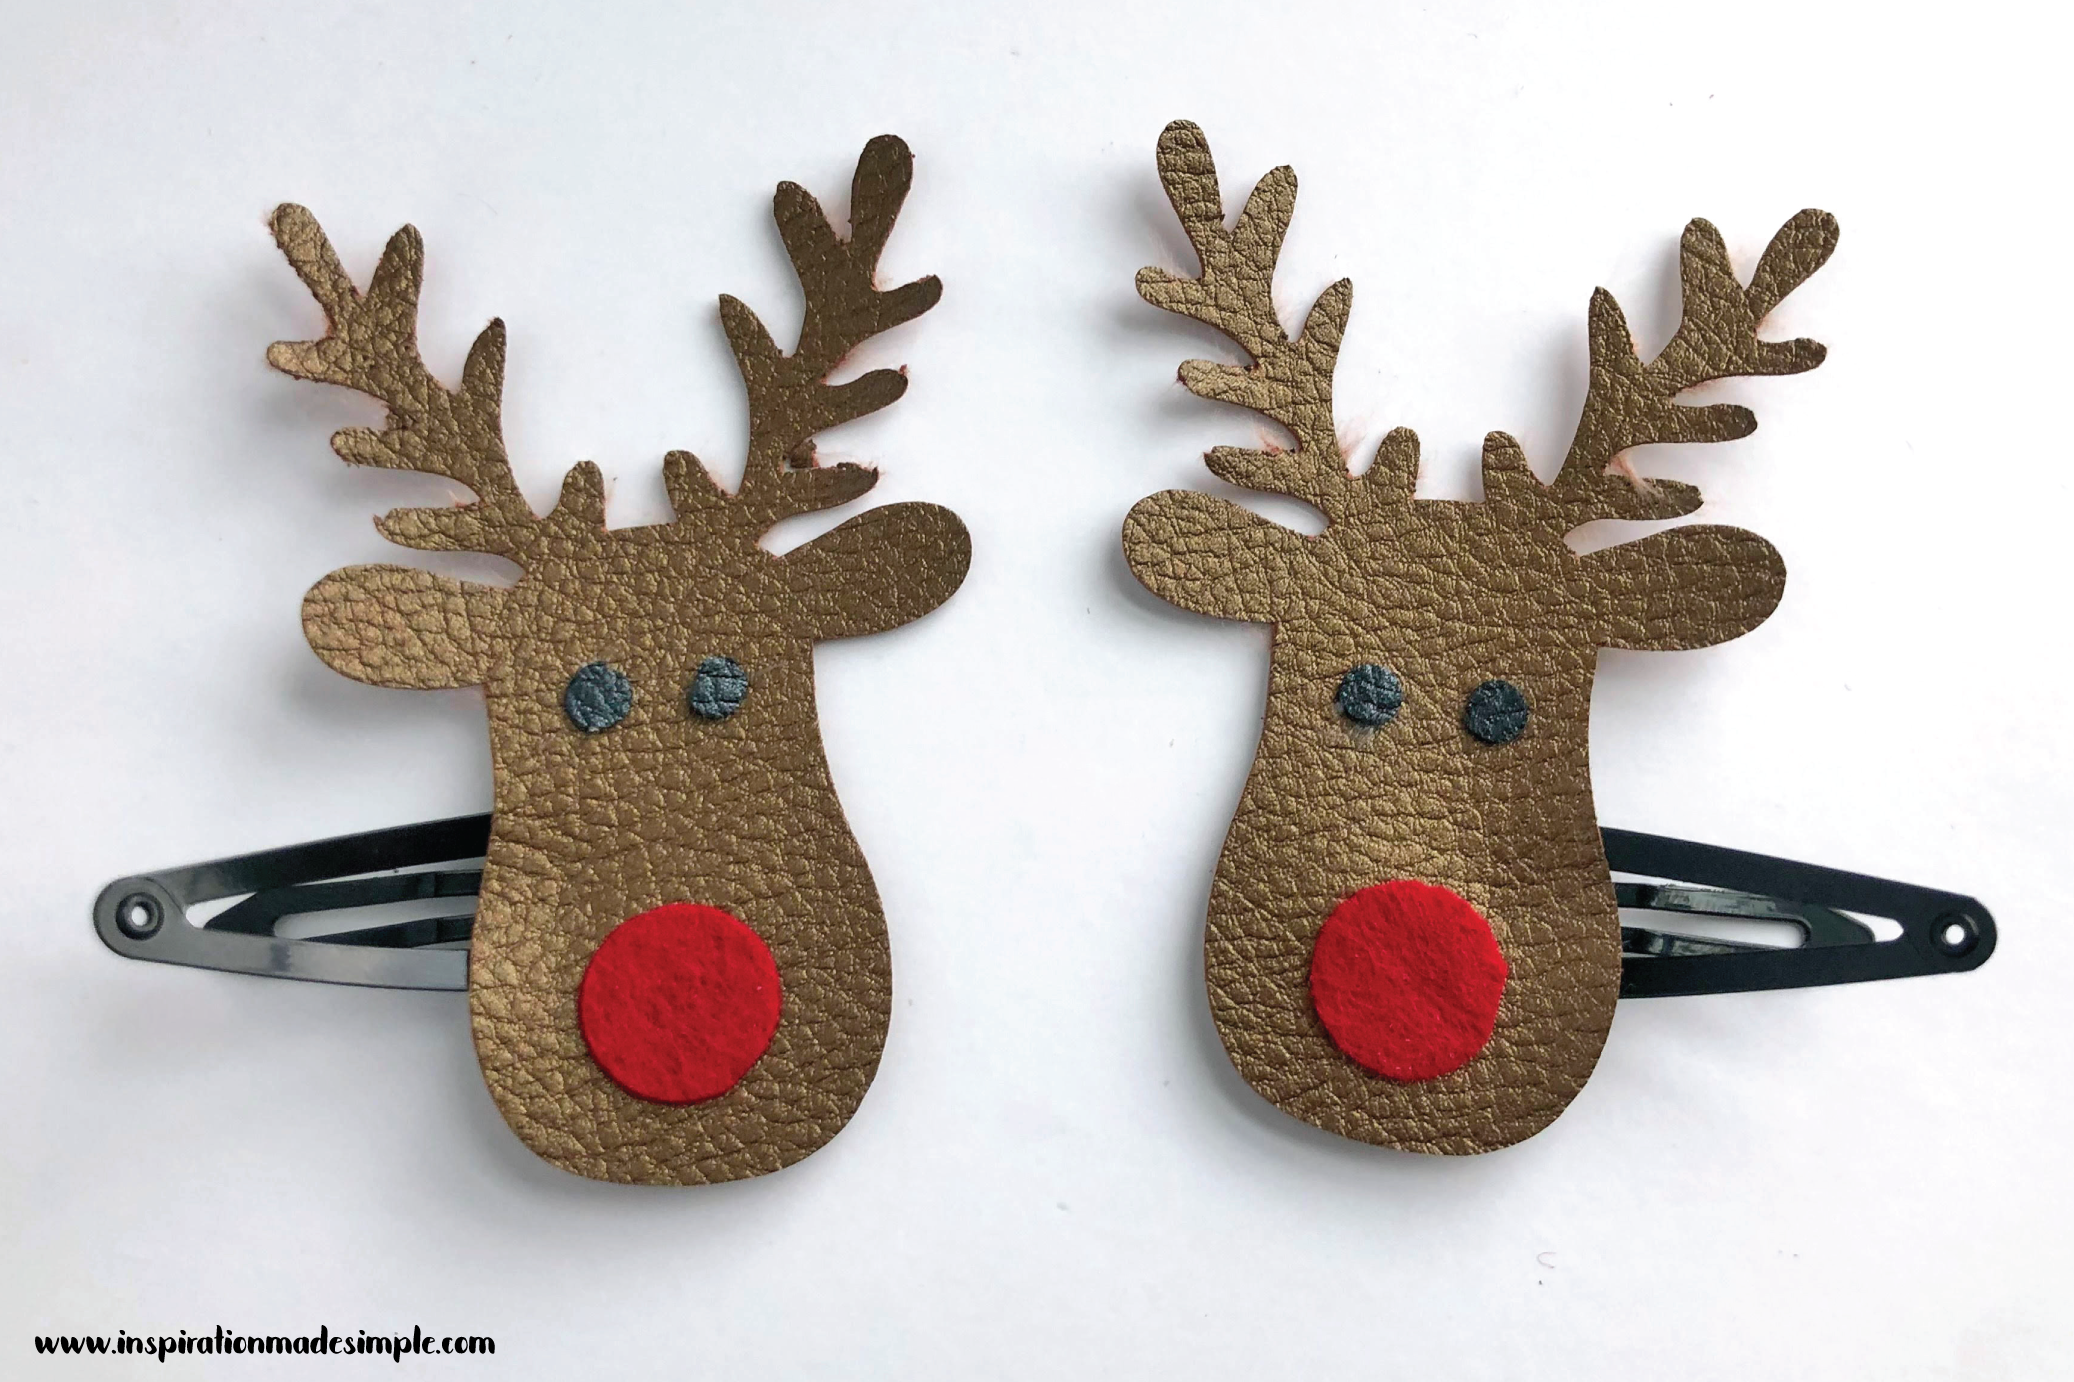 DIY Reindeer Clips with the Cricut Maker